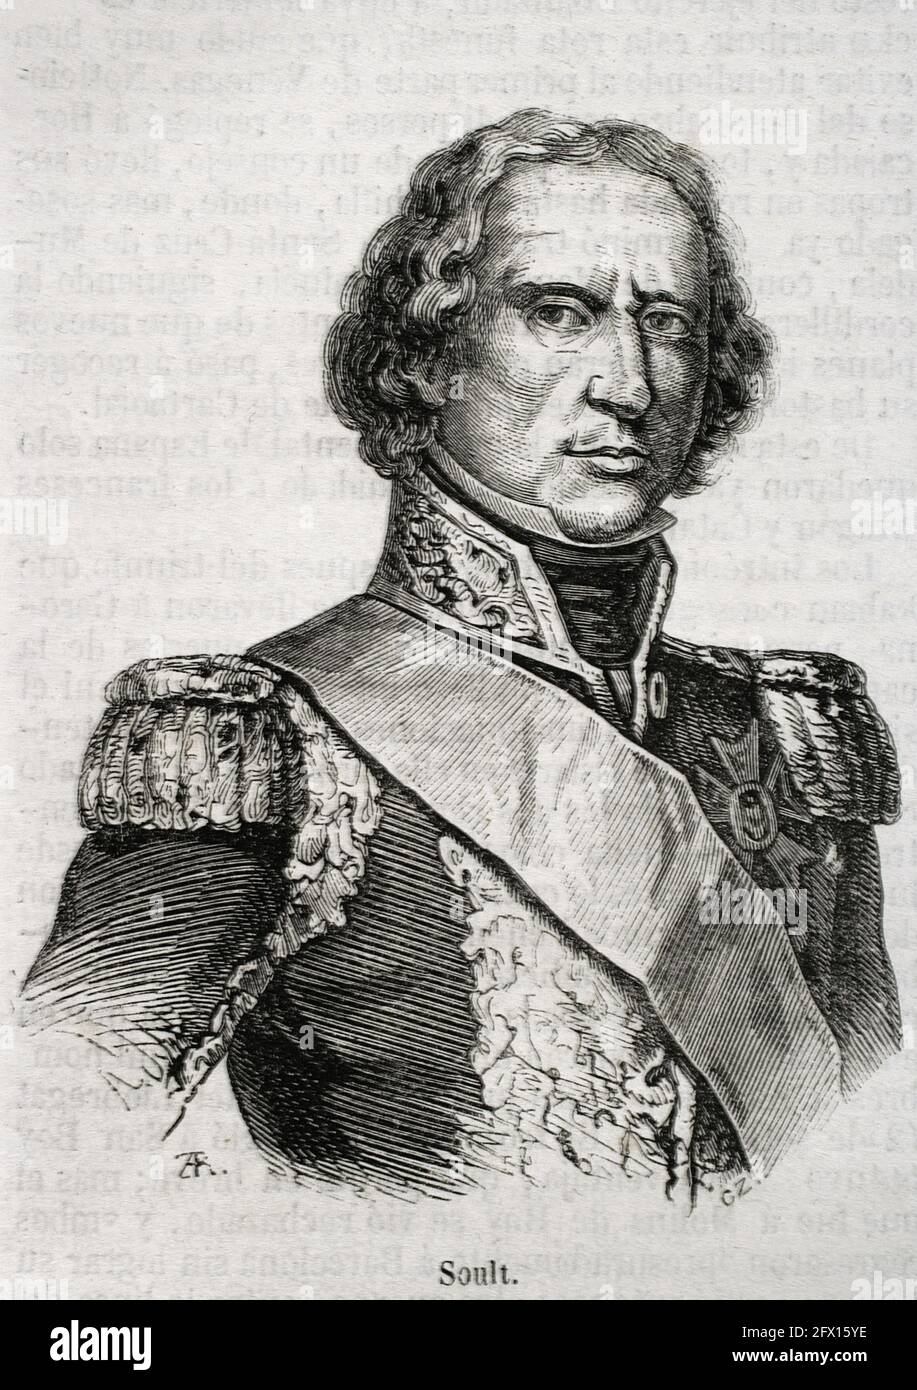 Jean-de-Dieu Soult, 1st Duke of Dalmatia (1769-1851). French military and politician. He took part in the Napoleonic Wars and led French troops during the Peninsular War. Portrait. Engraving. Historia General de España by Father Mariana. Madrid, 1853. Stock Photo